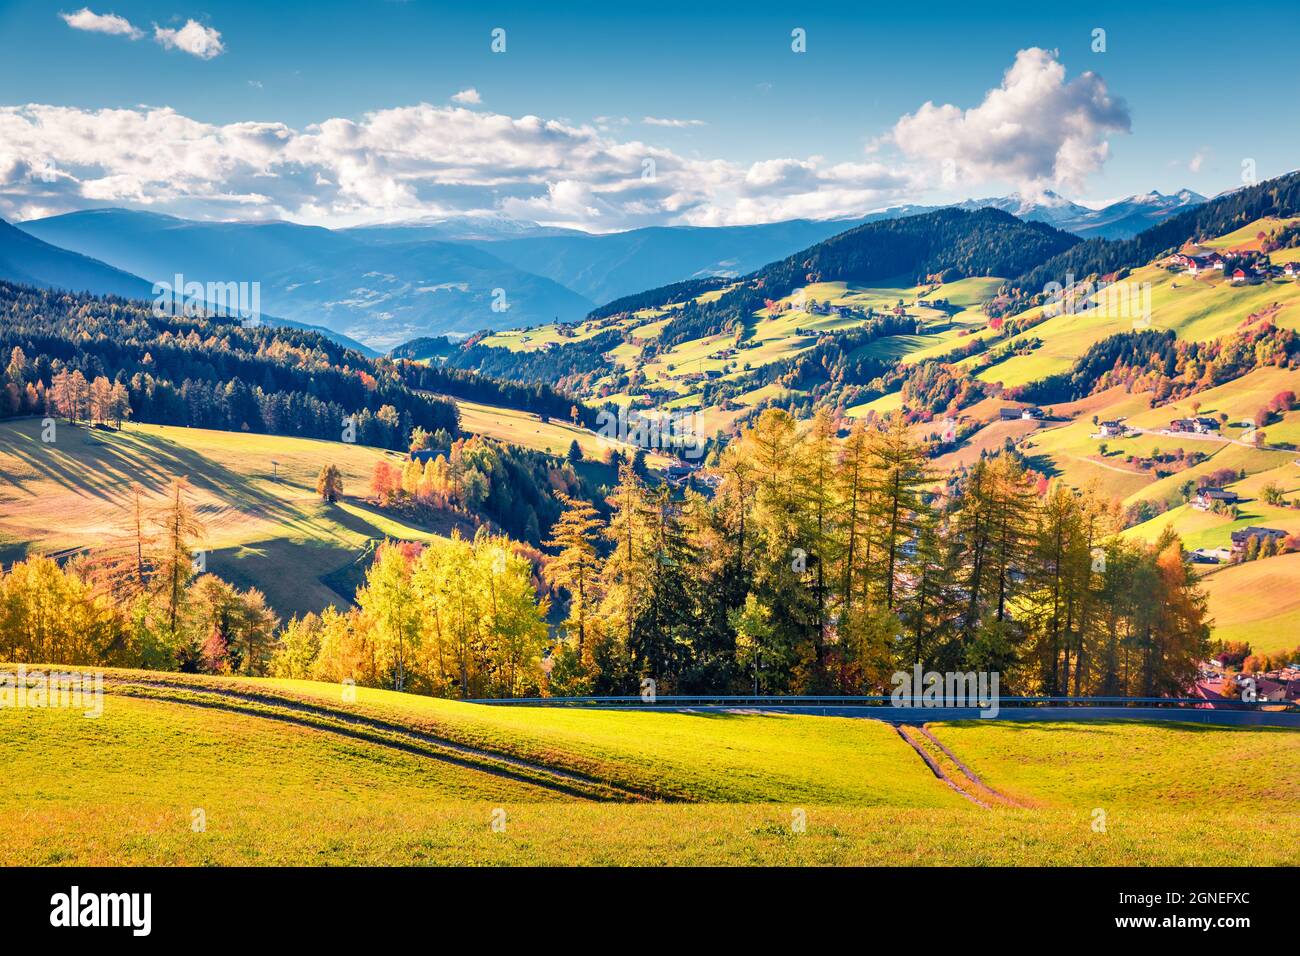 Nice autumn view of Santa Maddalena village. Colorful morning landscape of Dolomite Alps, Italy, Europe. Beauty of countryside concept background. Stock Photo